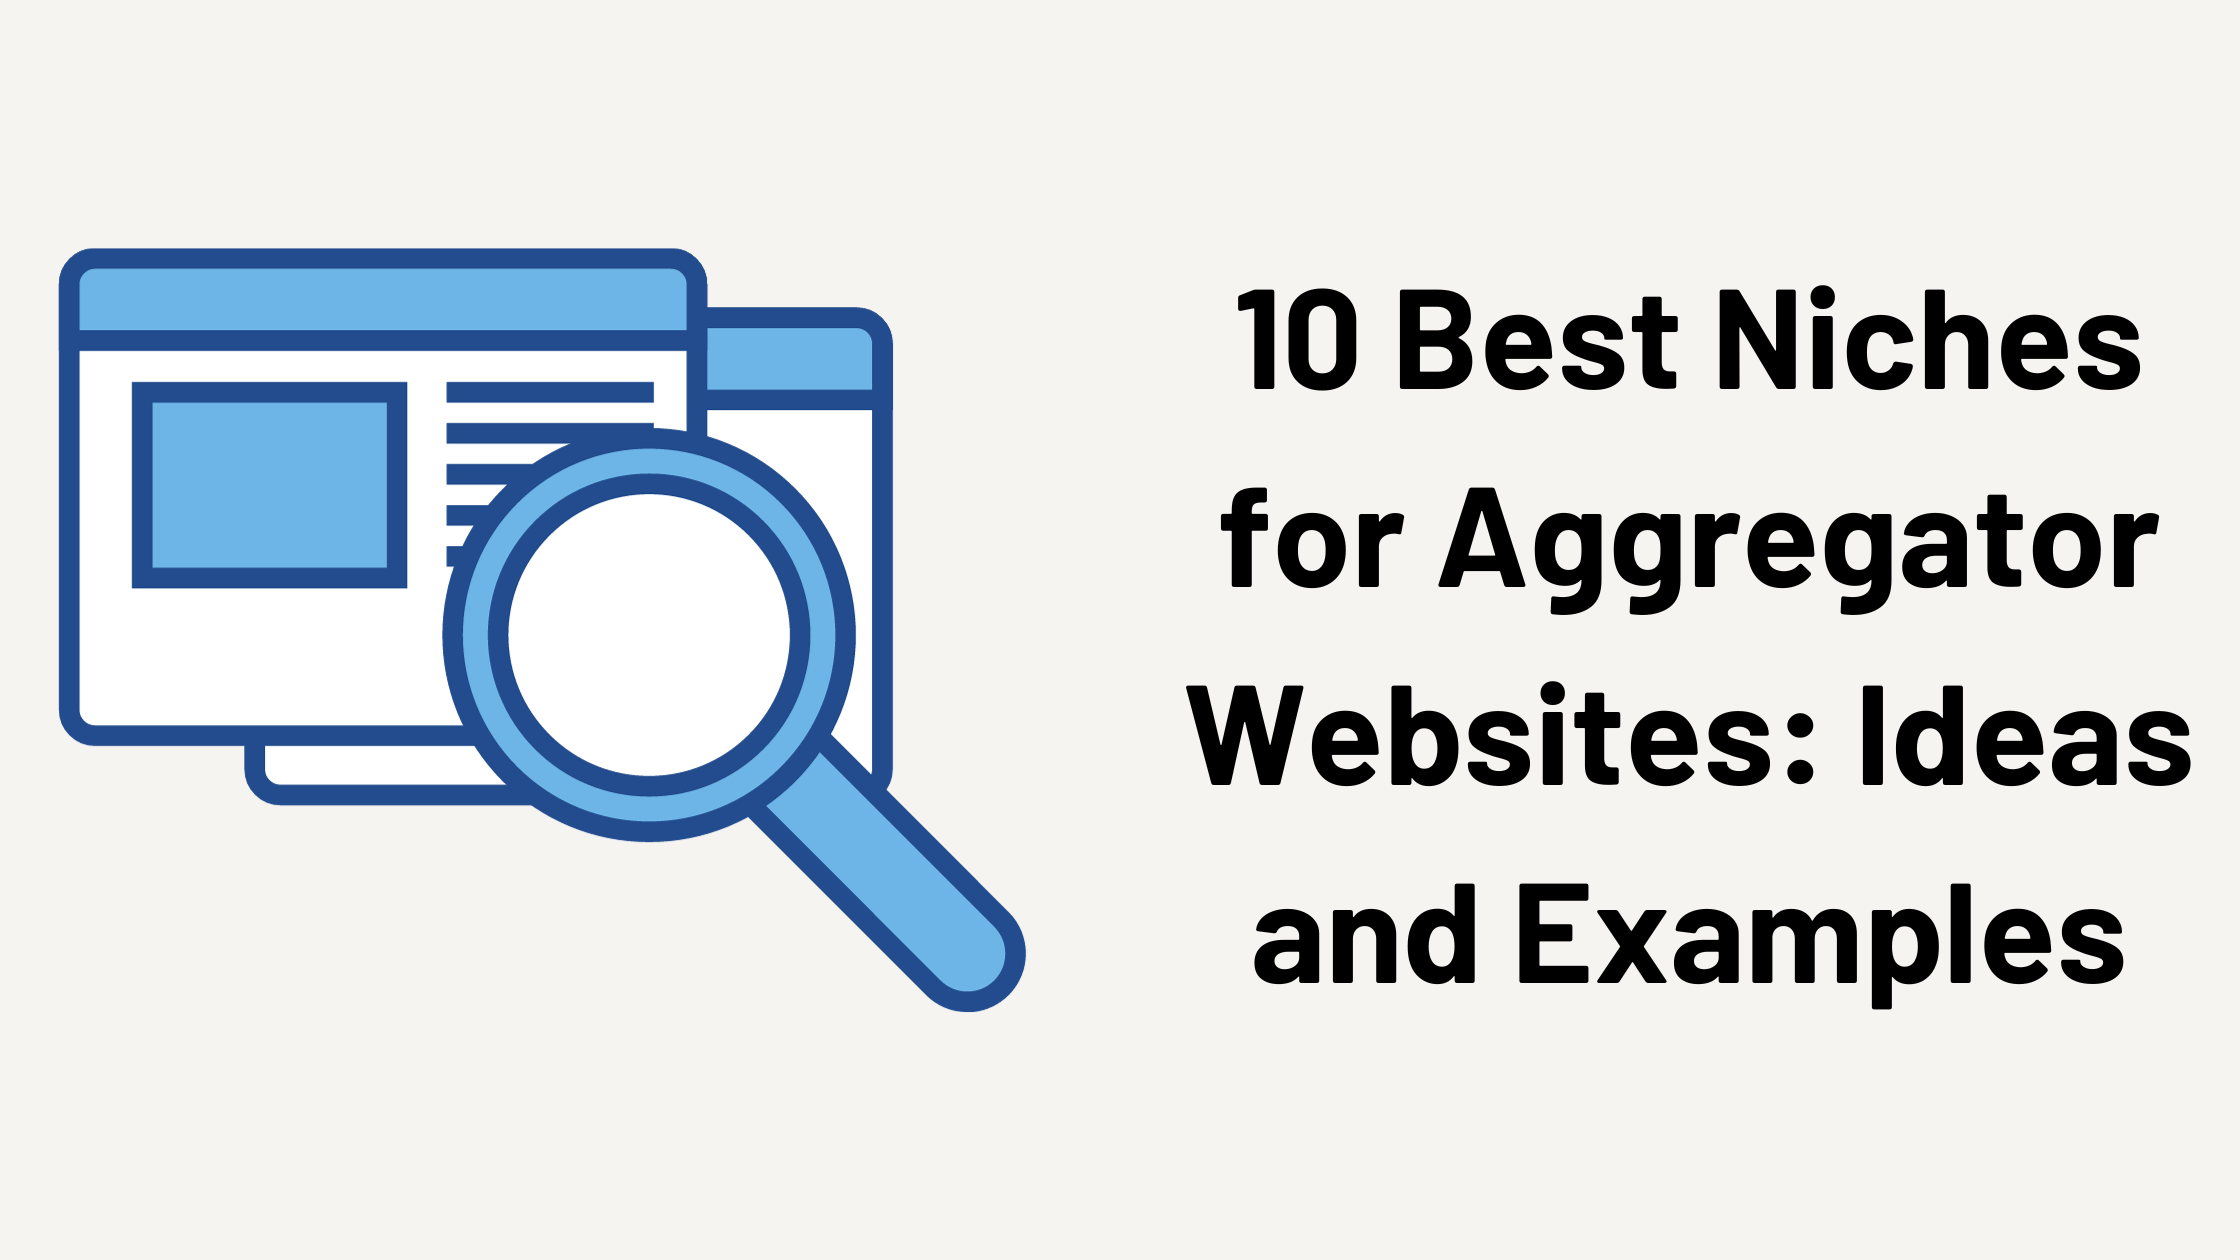 10 Best Niches for Aggregator Websites: Ideas and Examples